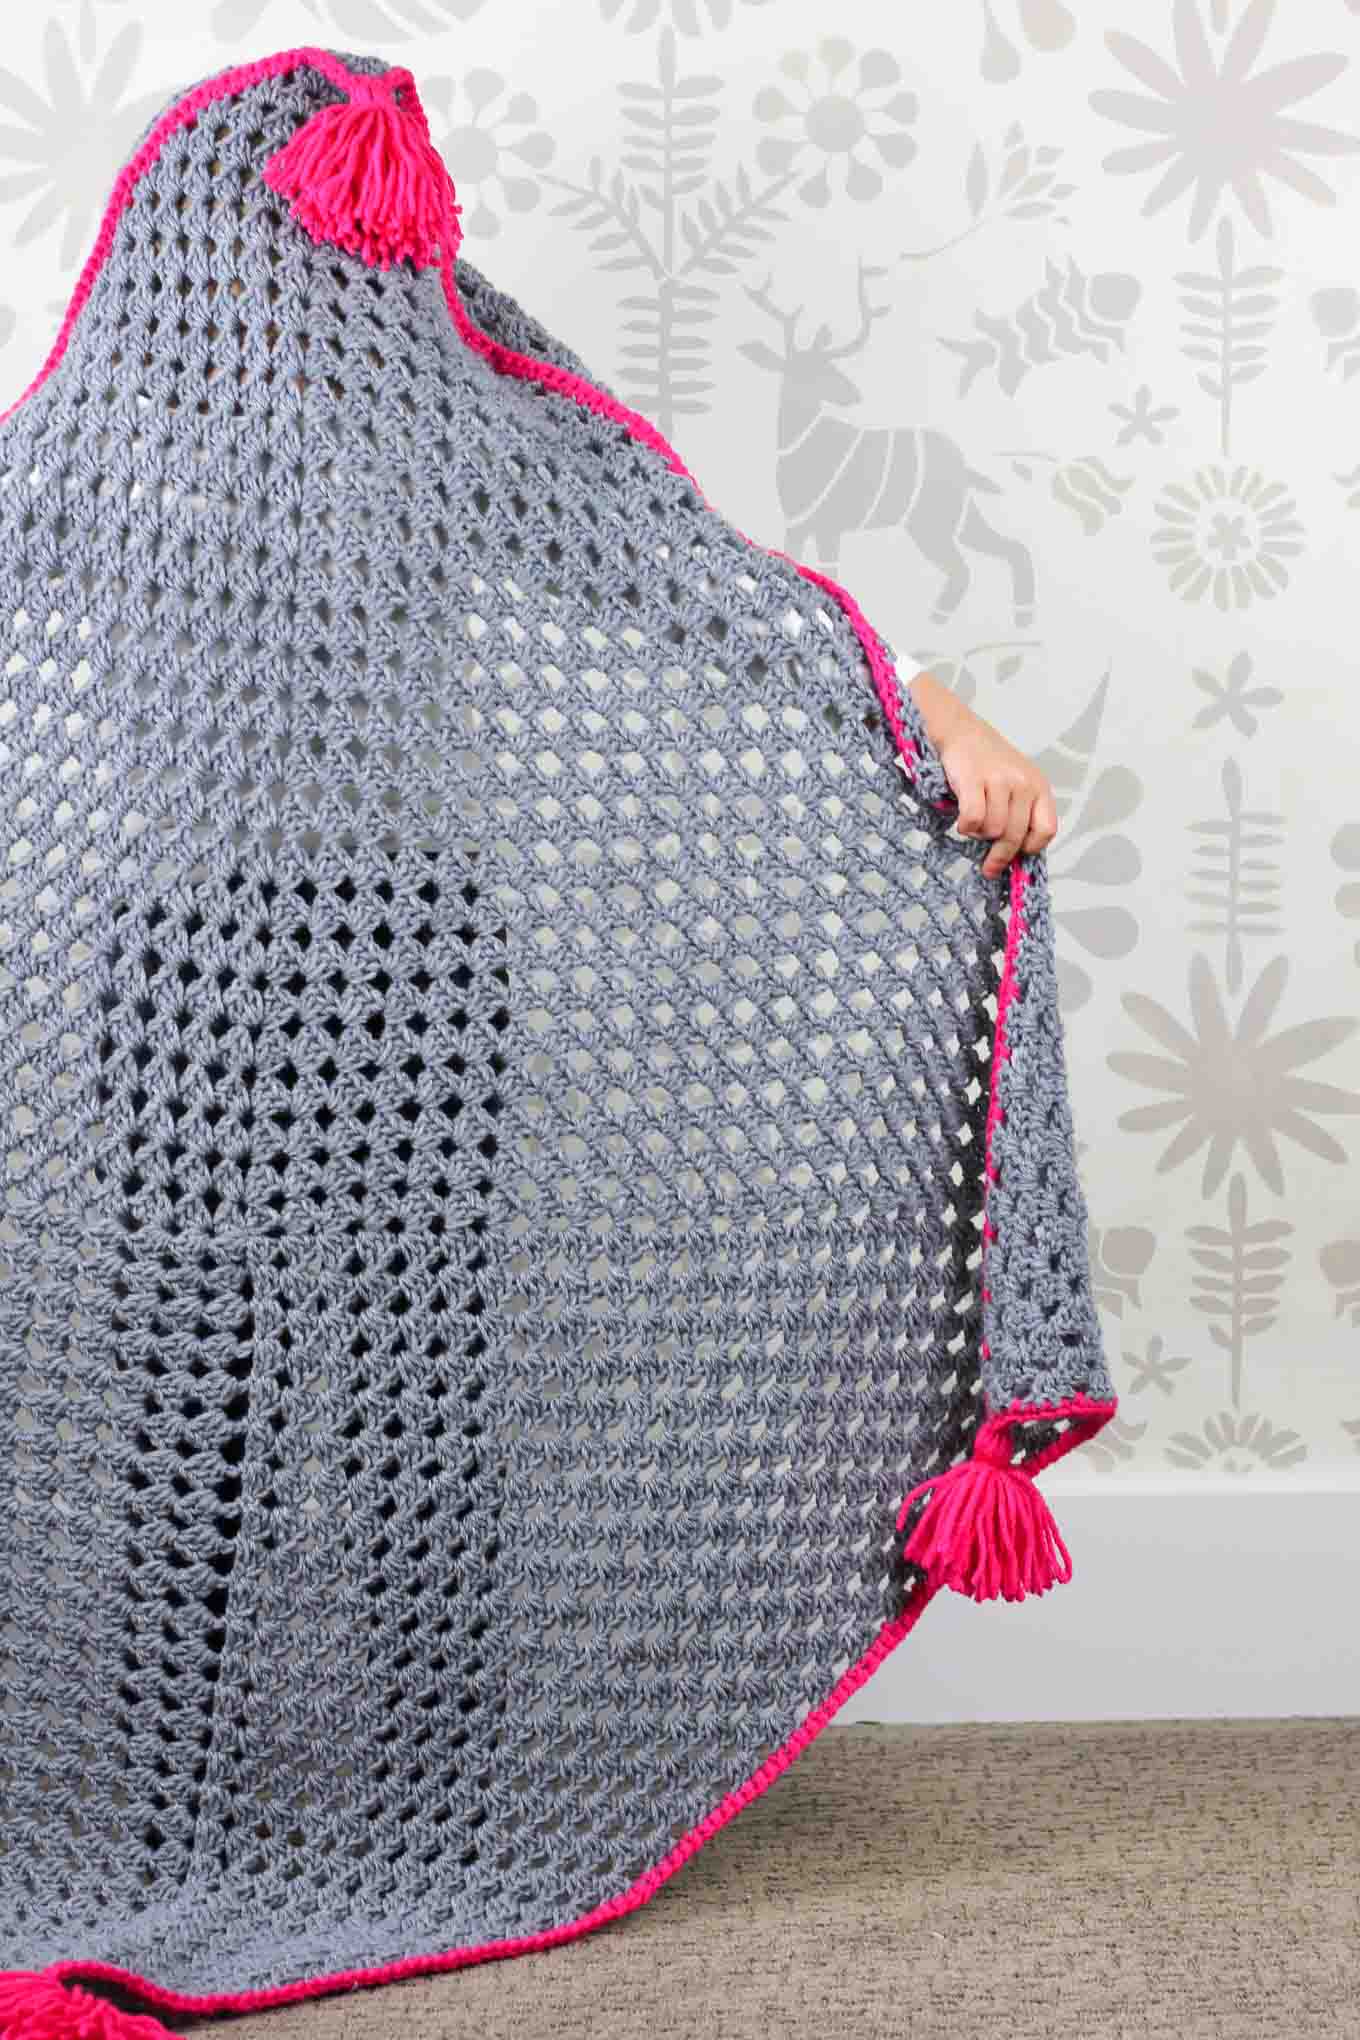 Based on a large granny square, the "Granny Gives Back" crochet hooded blanket pattern makes an easy and inexpensive project to donate to children's charities. The oversized hood and playful tassels will give any kid a safe, warm place to escape to. Click for the free granny square afghan pattern using Lion Brand Pound of Love yarn!